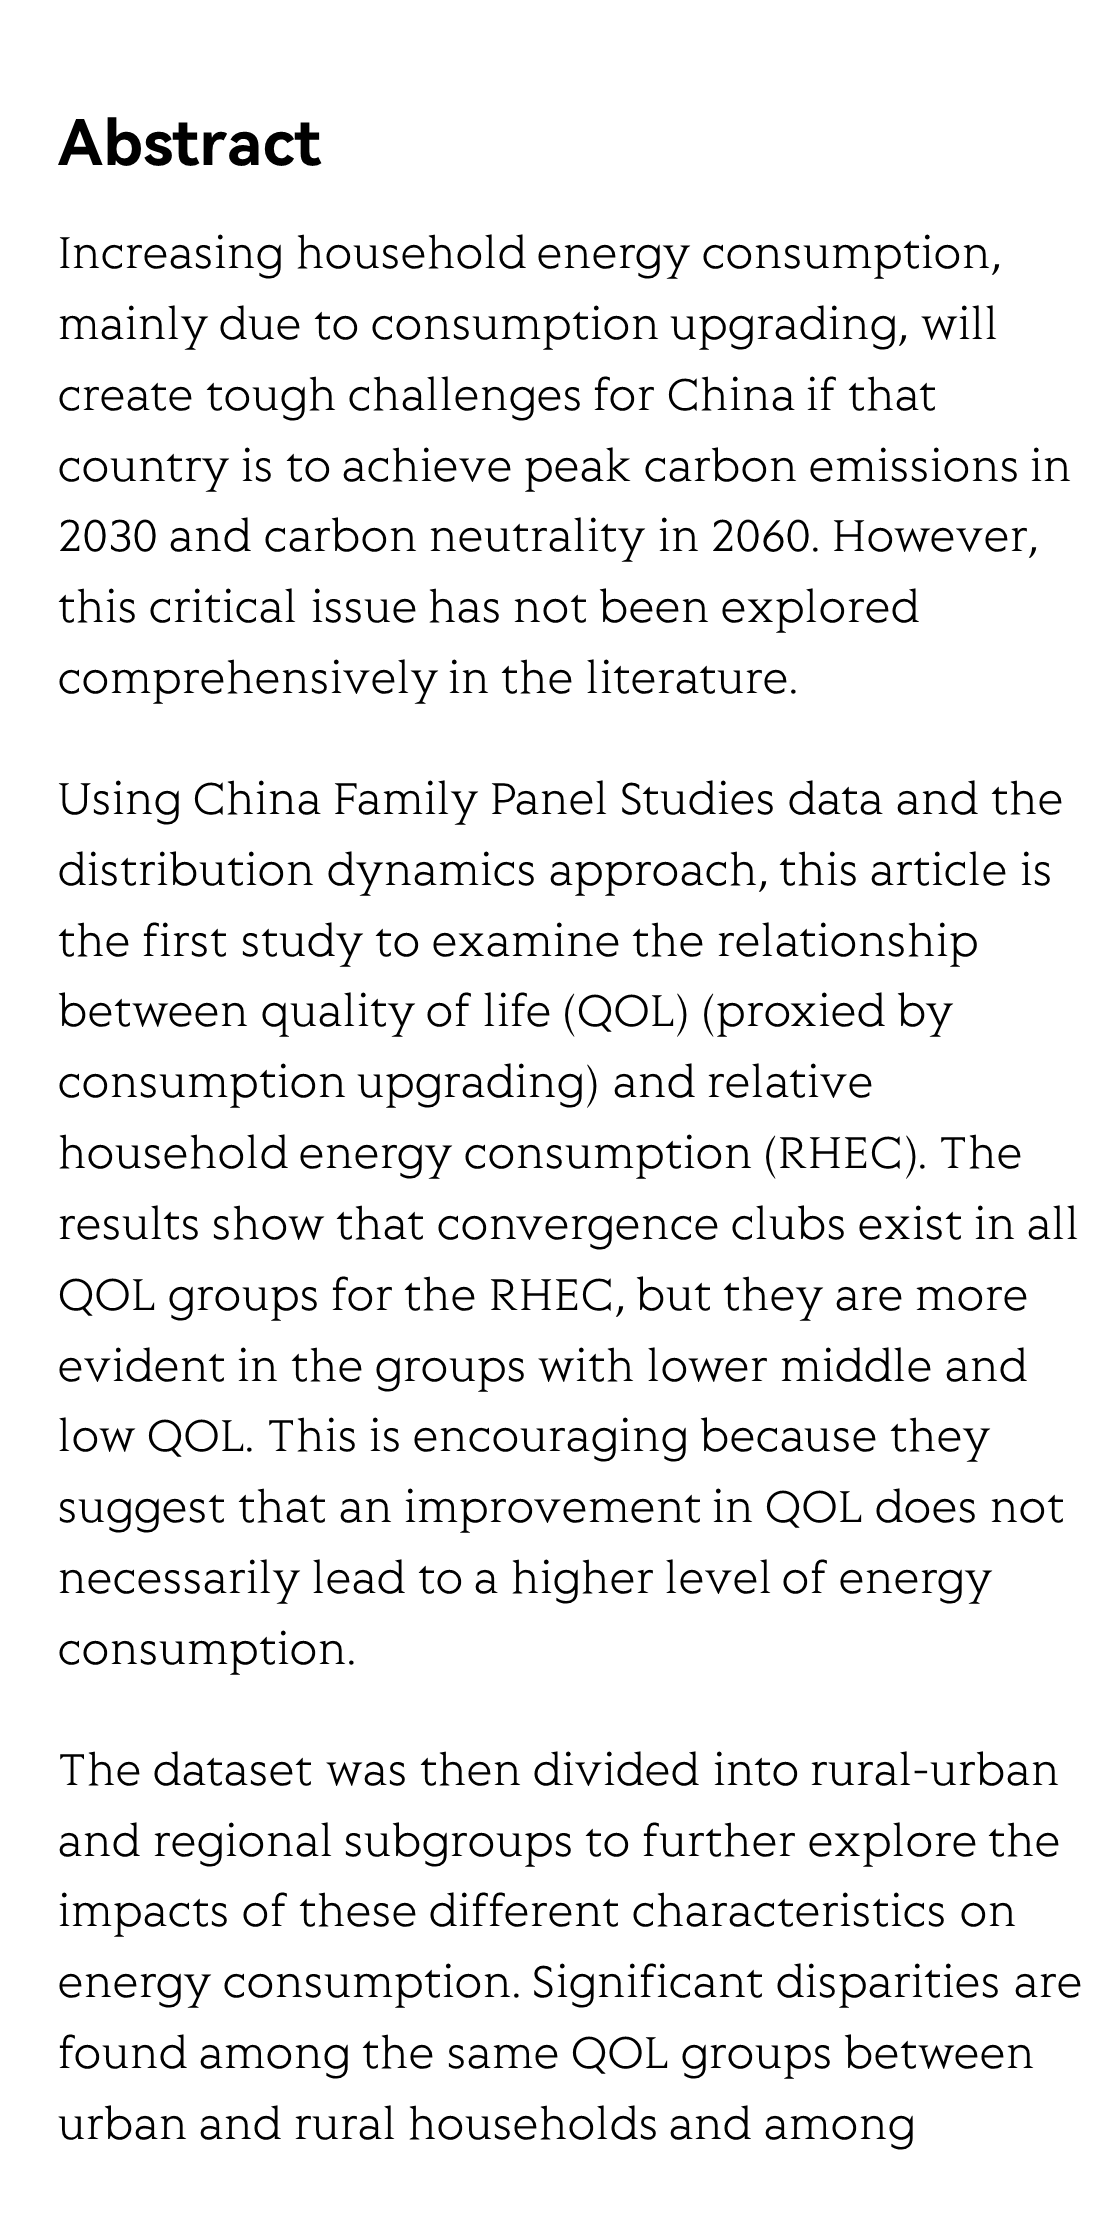 Quality of Life and Relative Household Energy Consumption in China_2